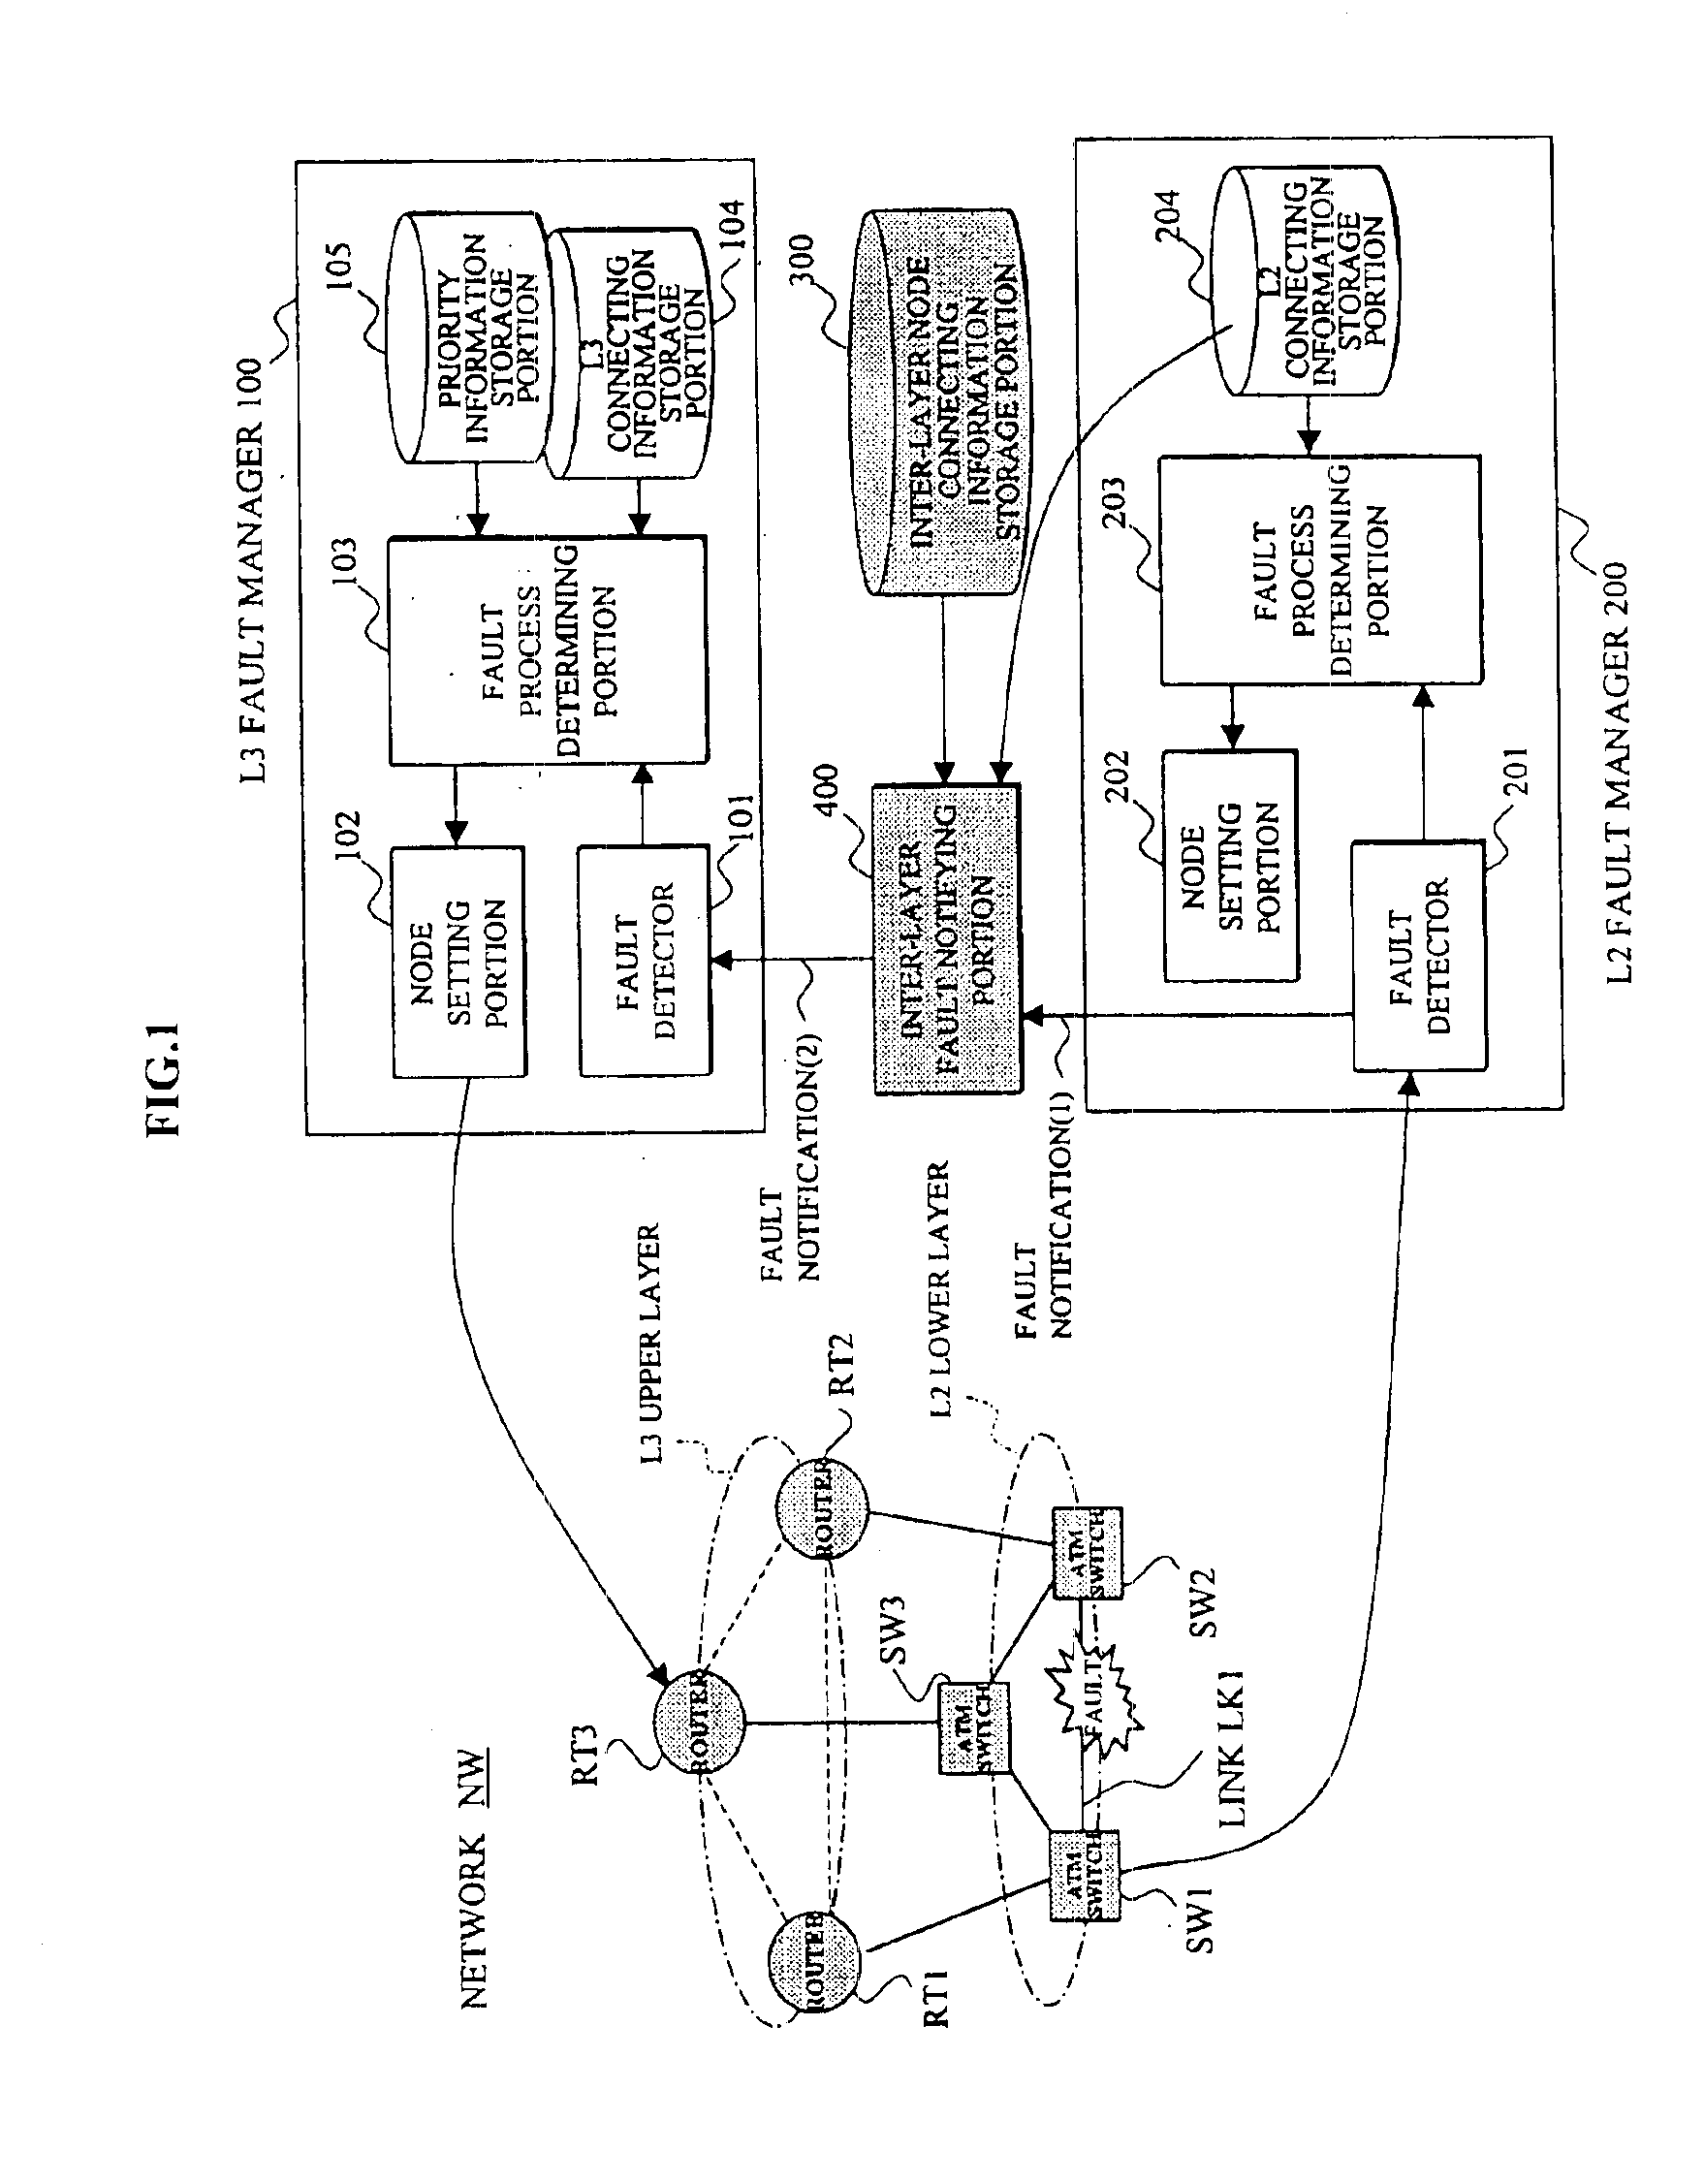 Network management system utilizing notification between fault manager for packet switching nodes of the higher-order network layer and fault manager for link offering nodes of the lower-order network layer